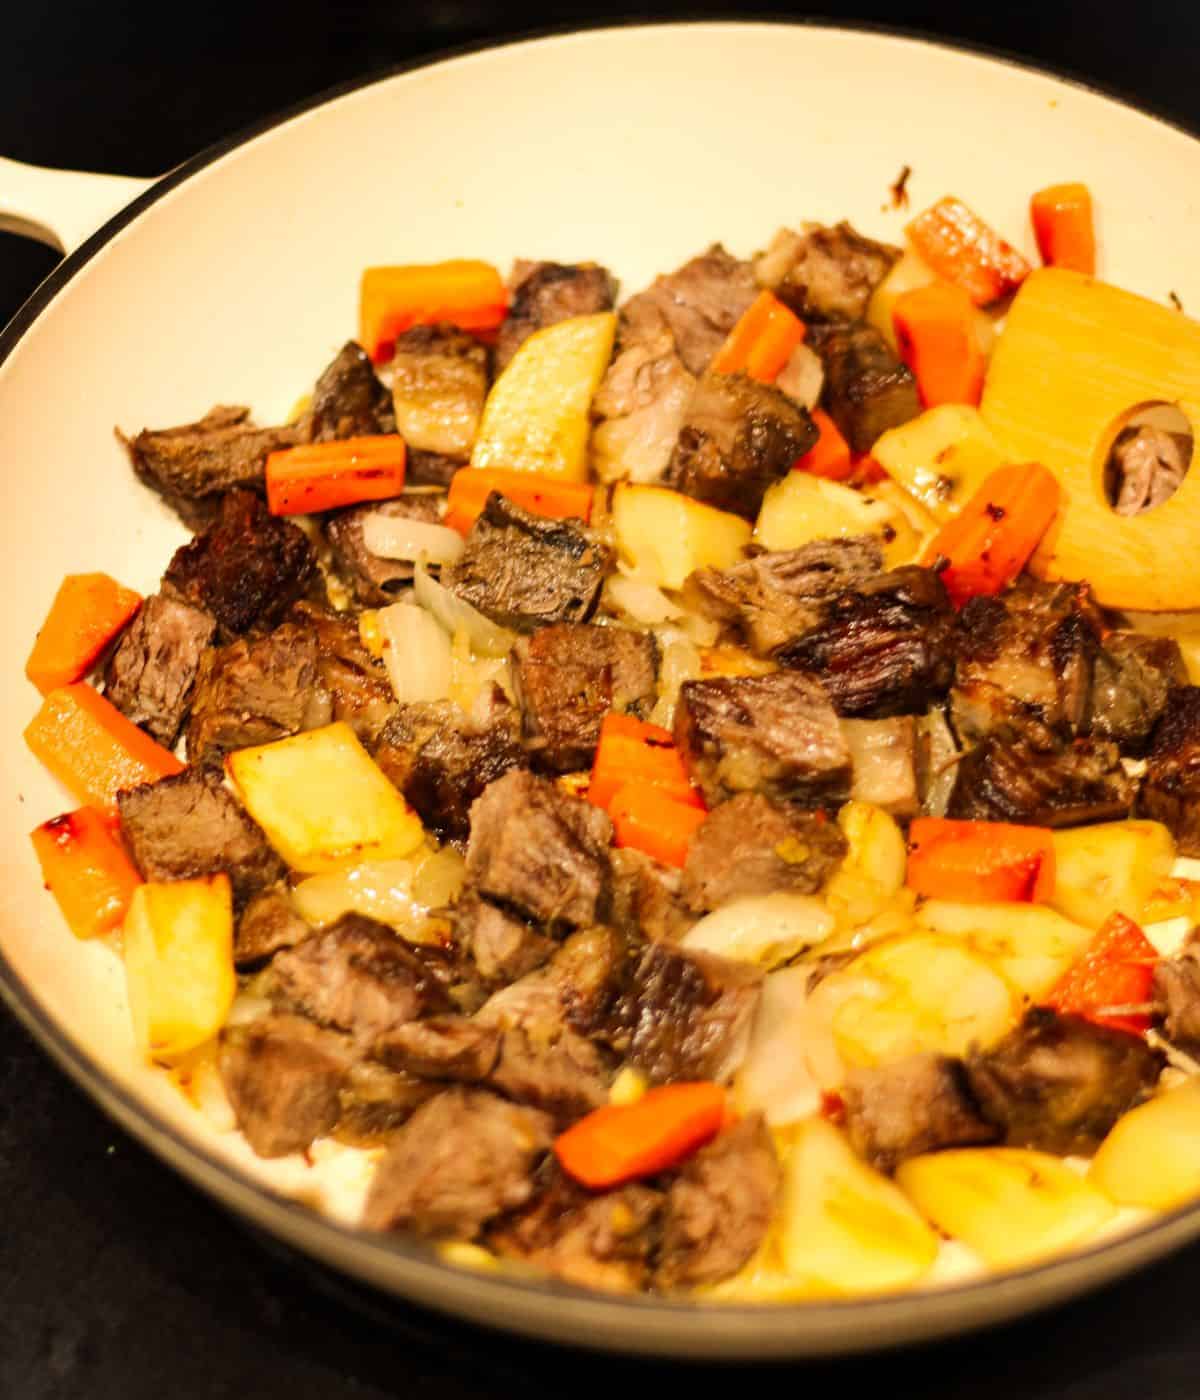 Searing beef, carrots, and potatoes for the beef curry.